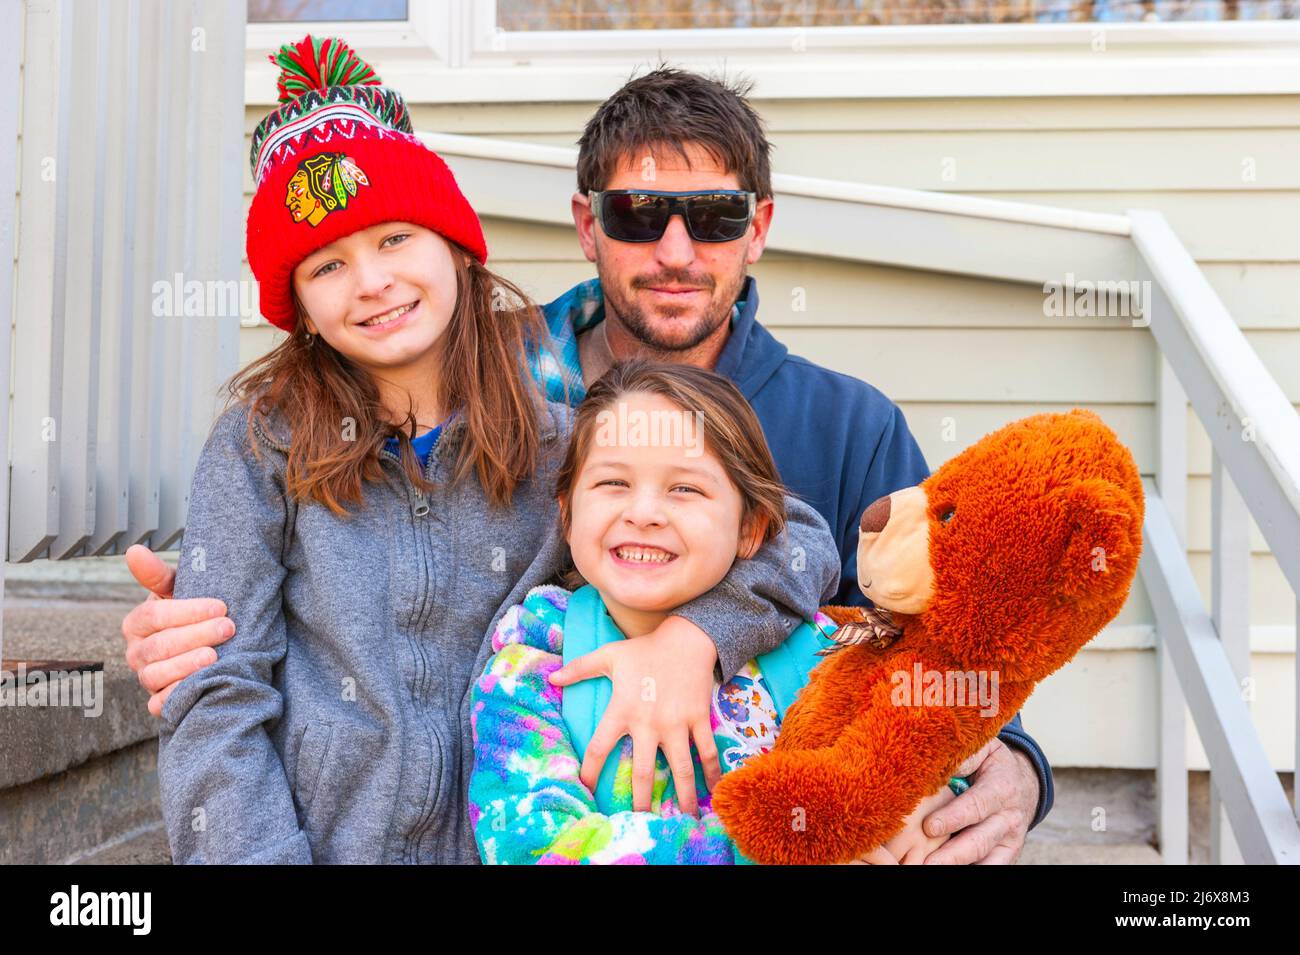 Happy single parent working class family posing for the camera in Ludington, Michigan, USA. Stock Photo